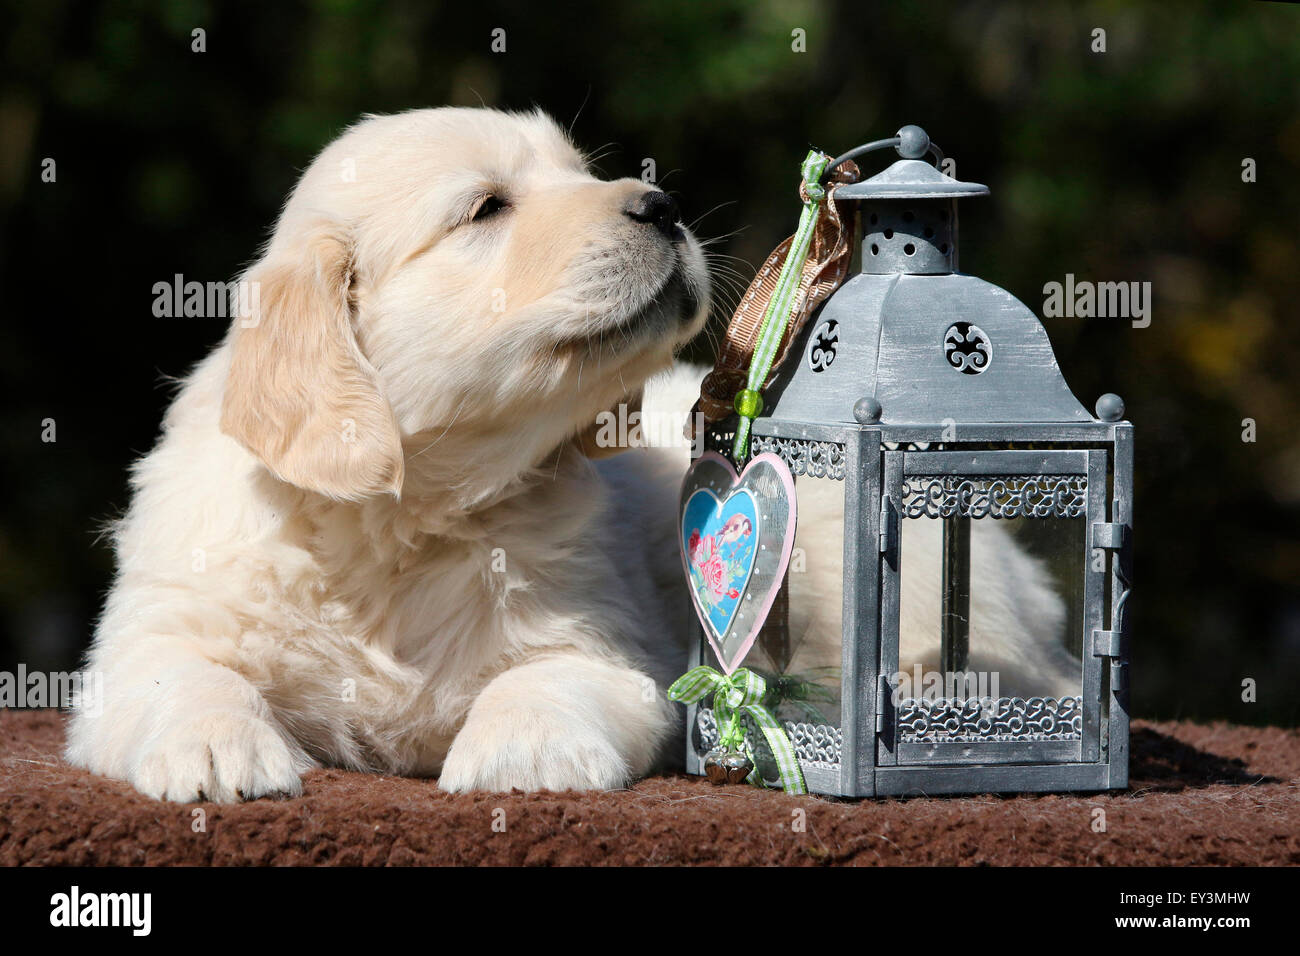 Golden Retriever. Puppy Lino (8 weeks old) lying next to a lantern. Germany Stock Photo